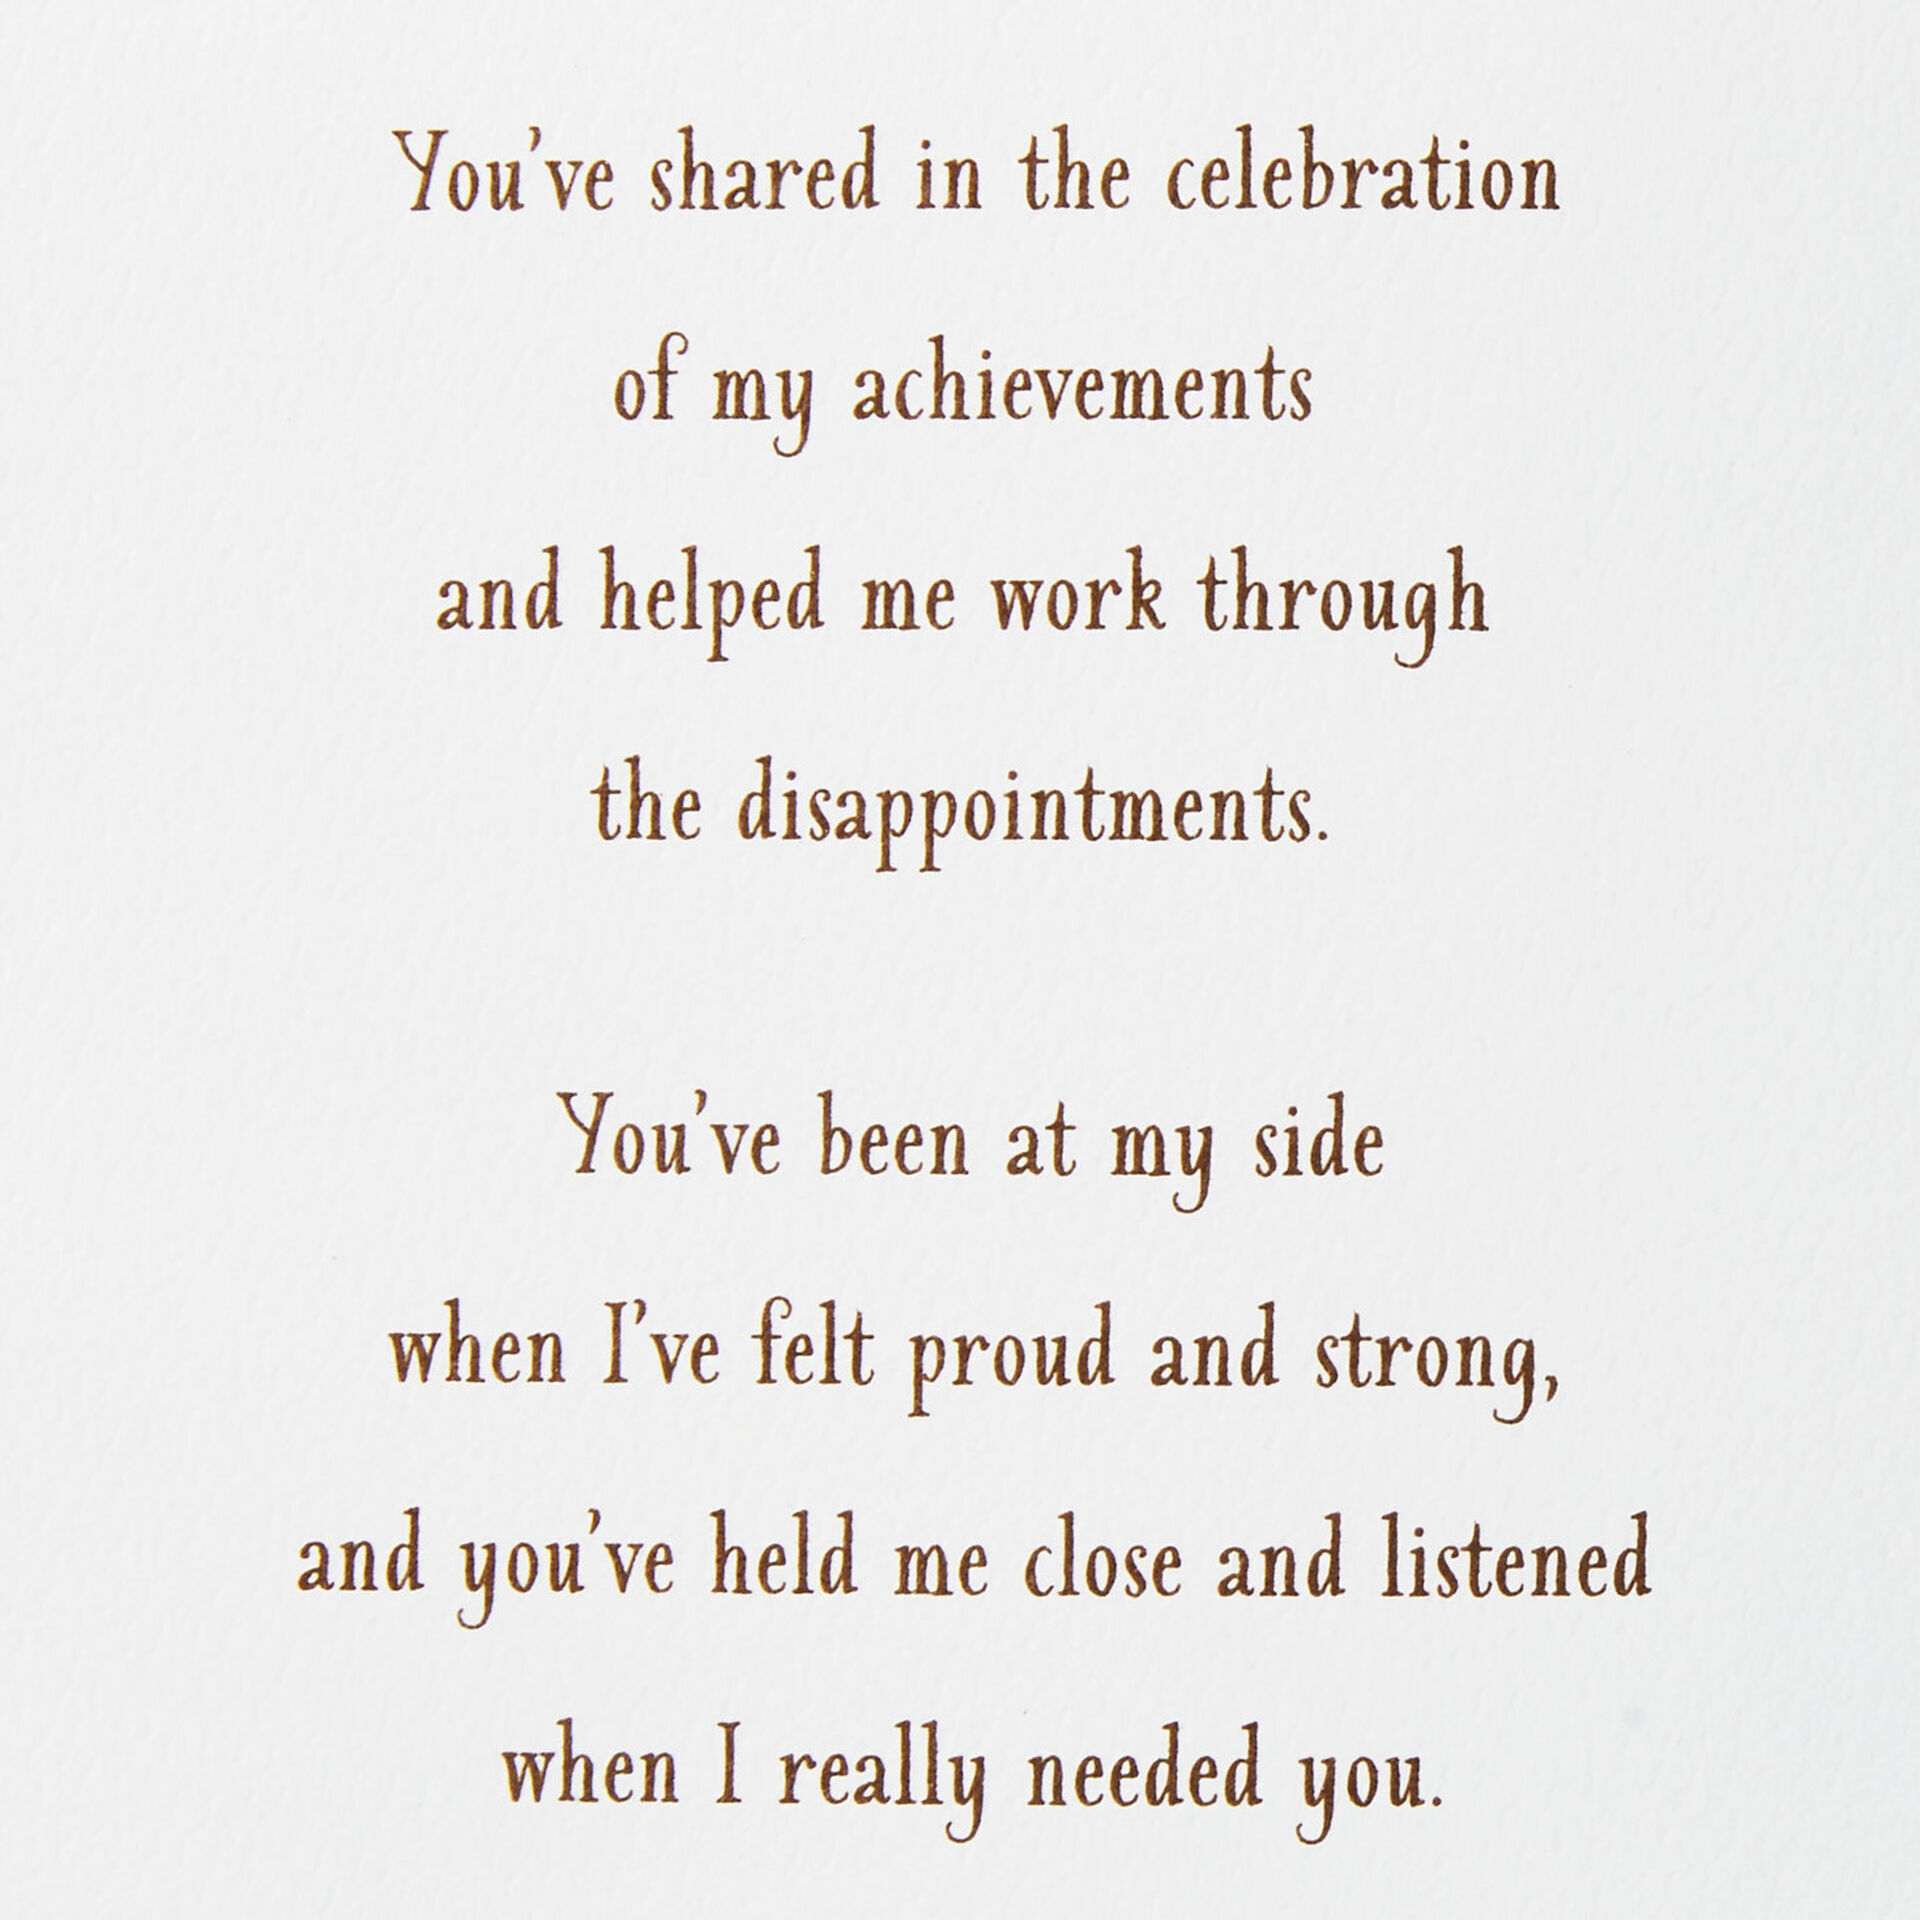 Woodgrain-and-Leaves-Anniversary-Card-for-Husband_859AVY2899_02